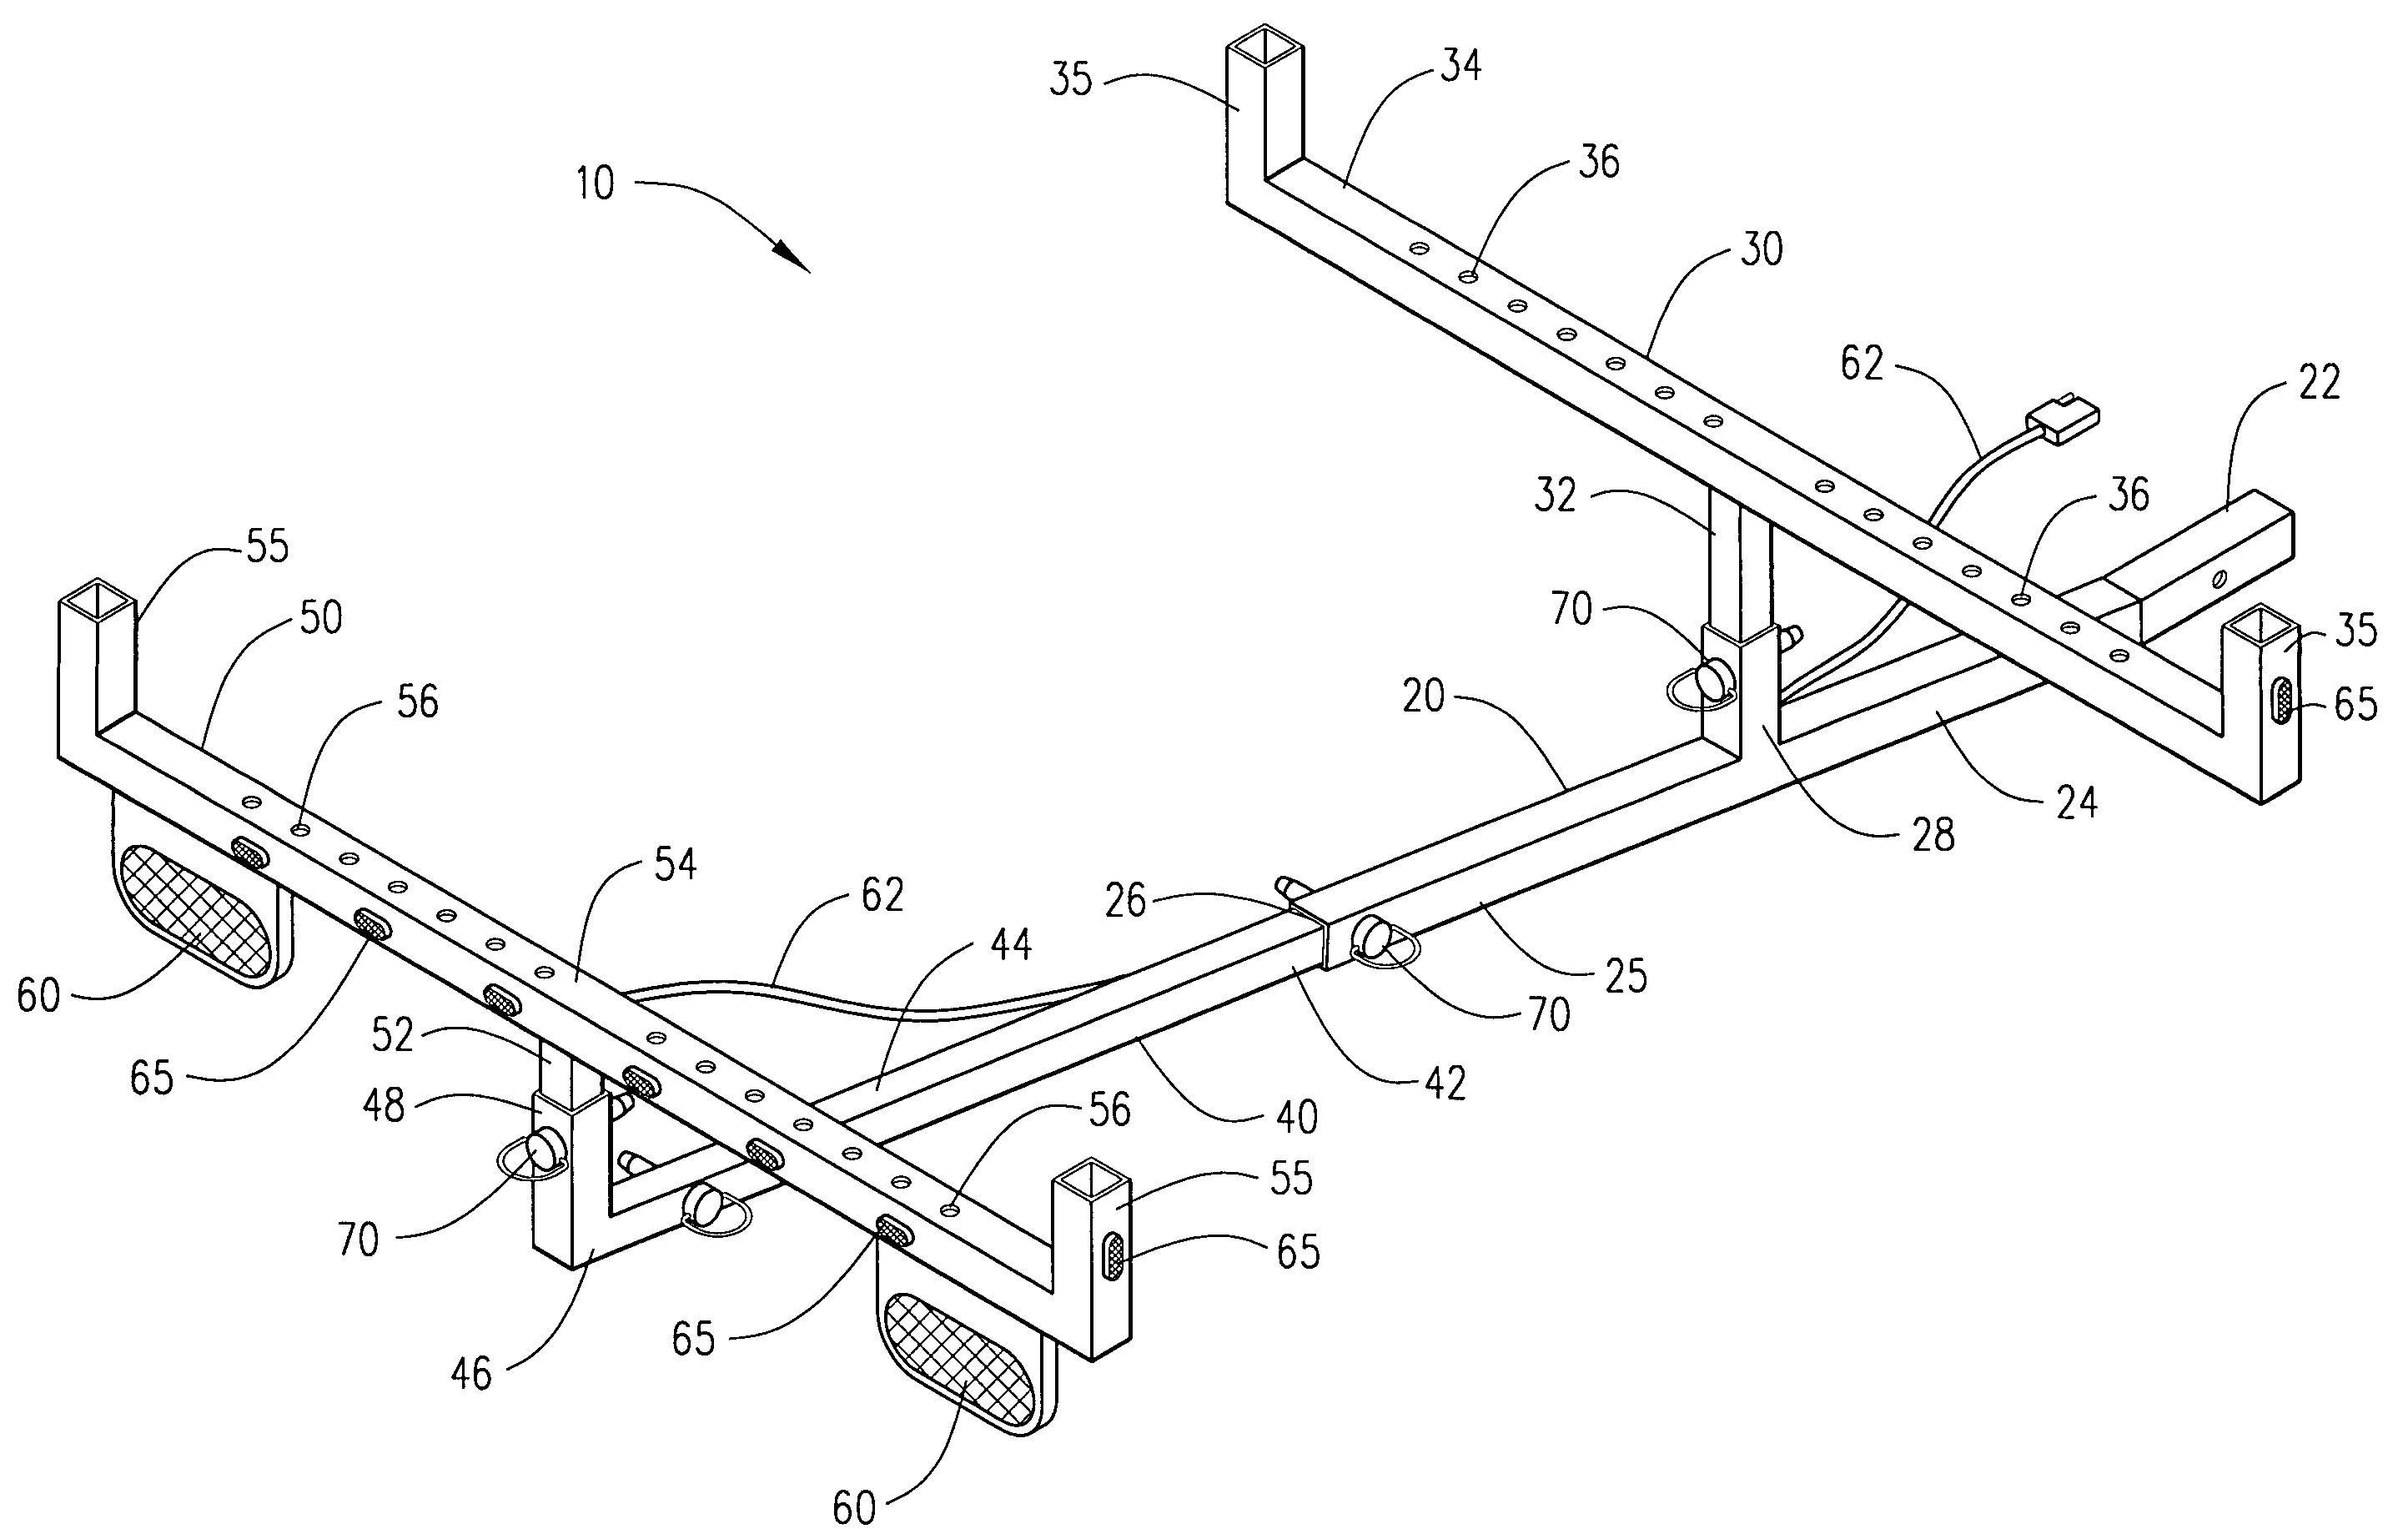 Vehicle cargo bed extension device